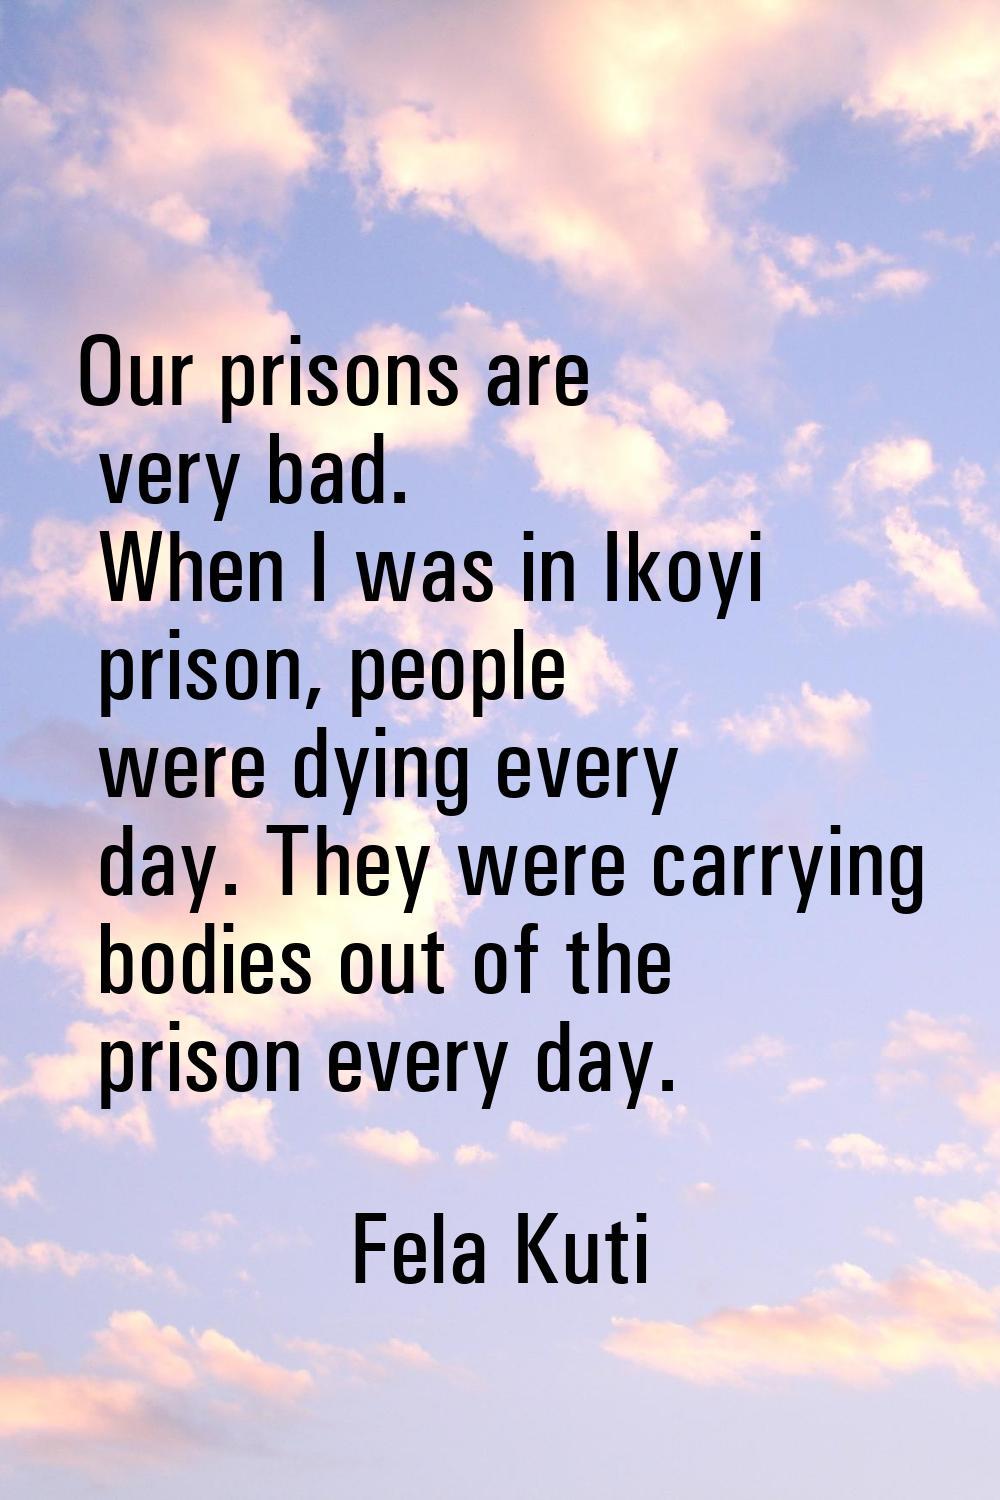 Our prisons are very bad. When I was in Ikoyi prison, people were dying every day. They were carryi